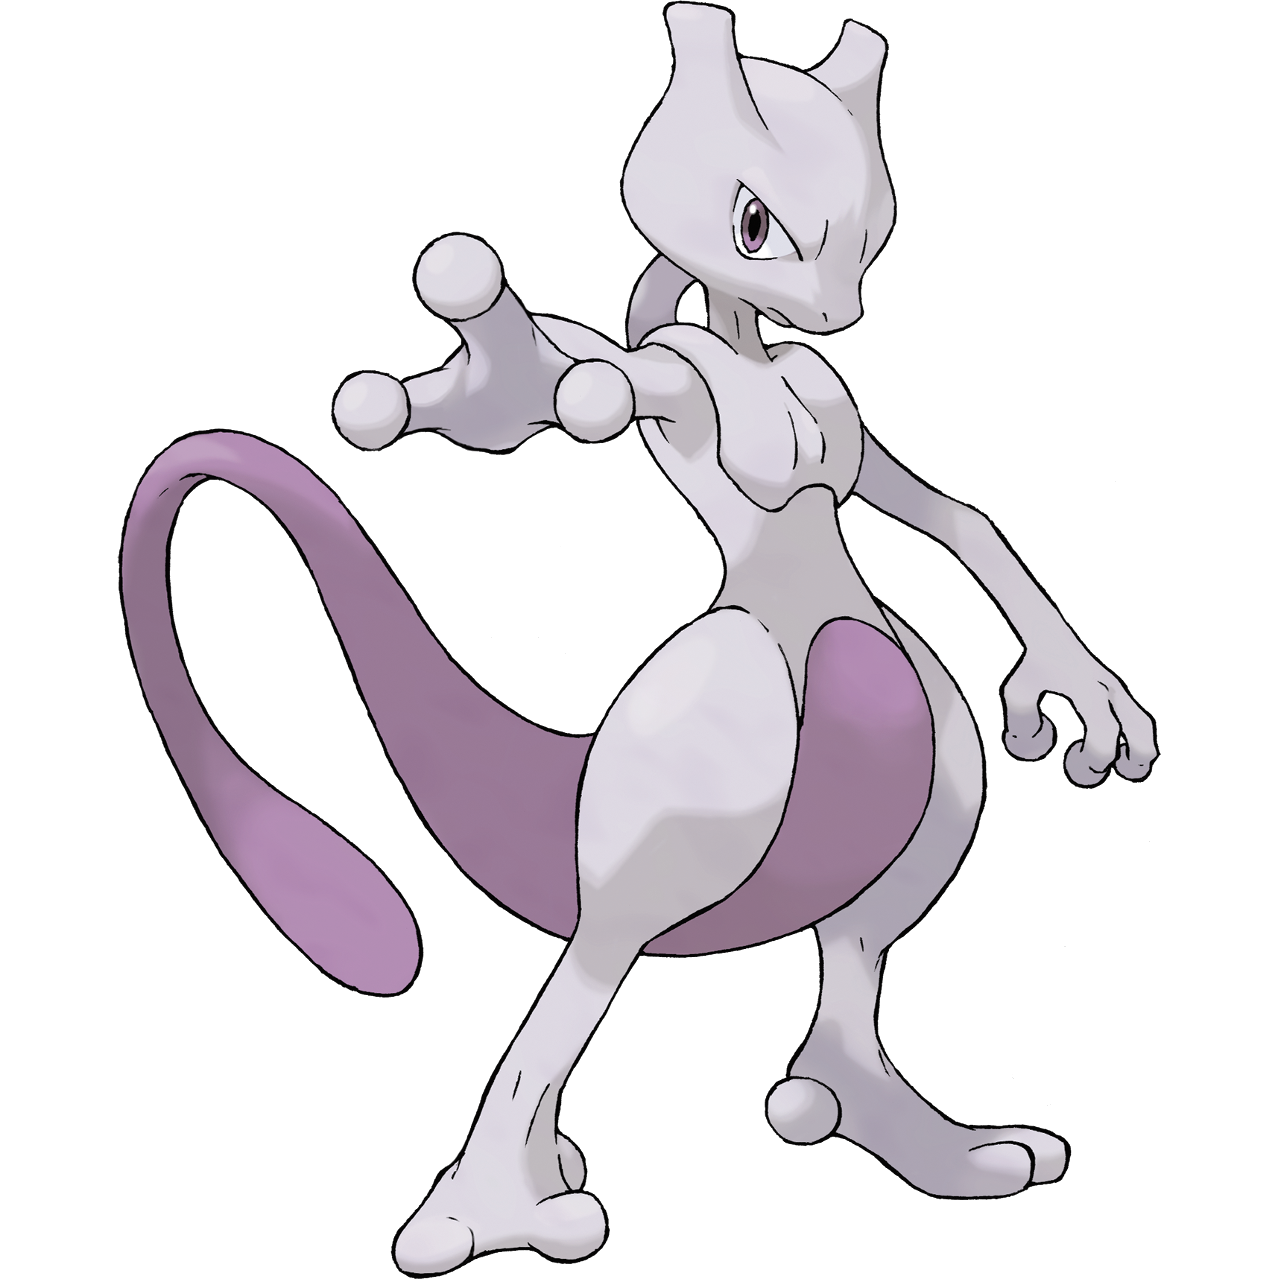 Mewtwo PNG - 46182